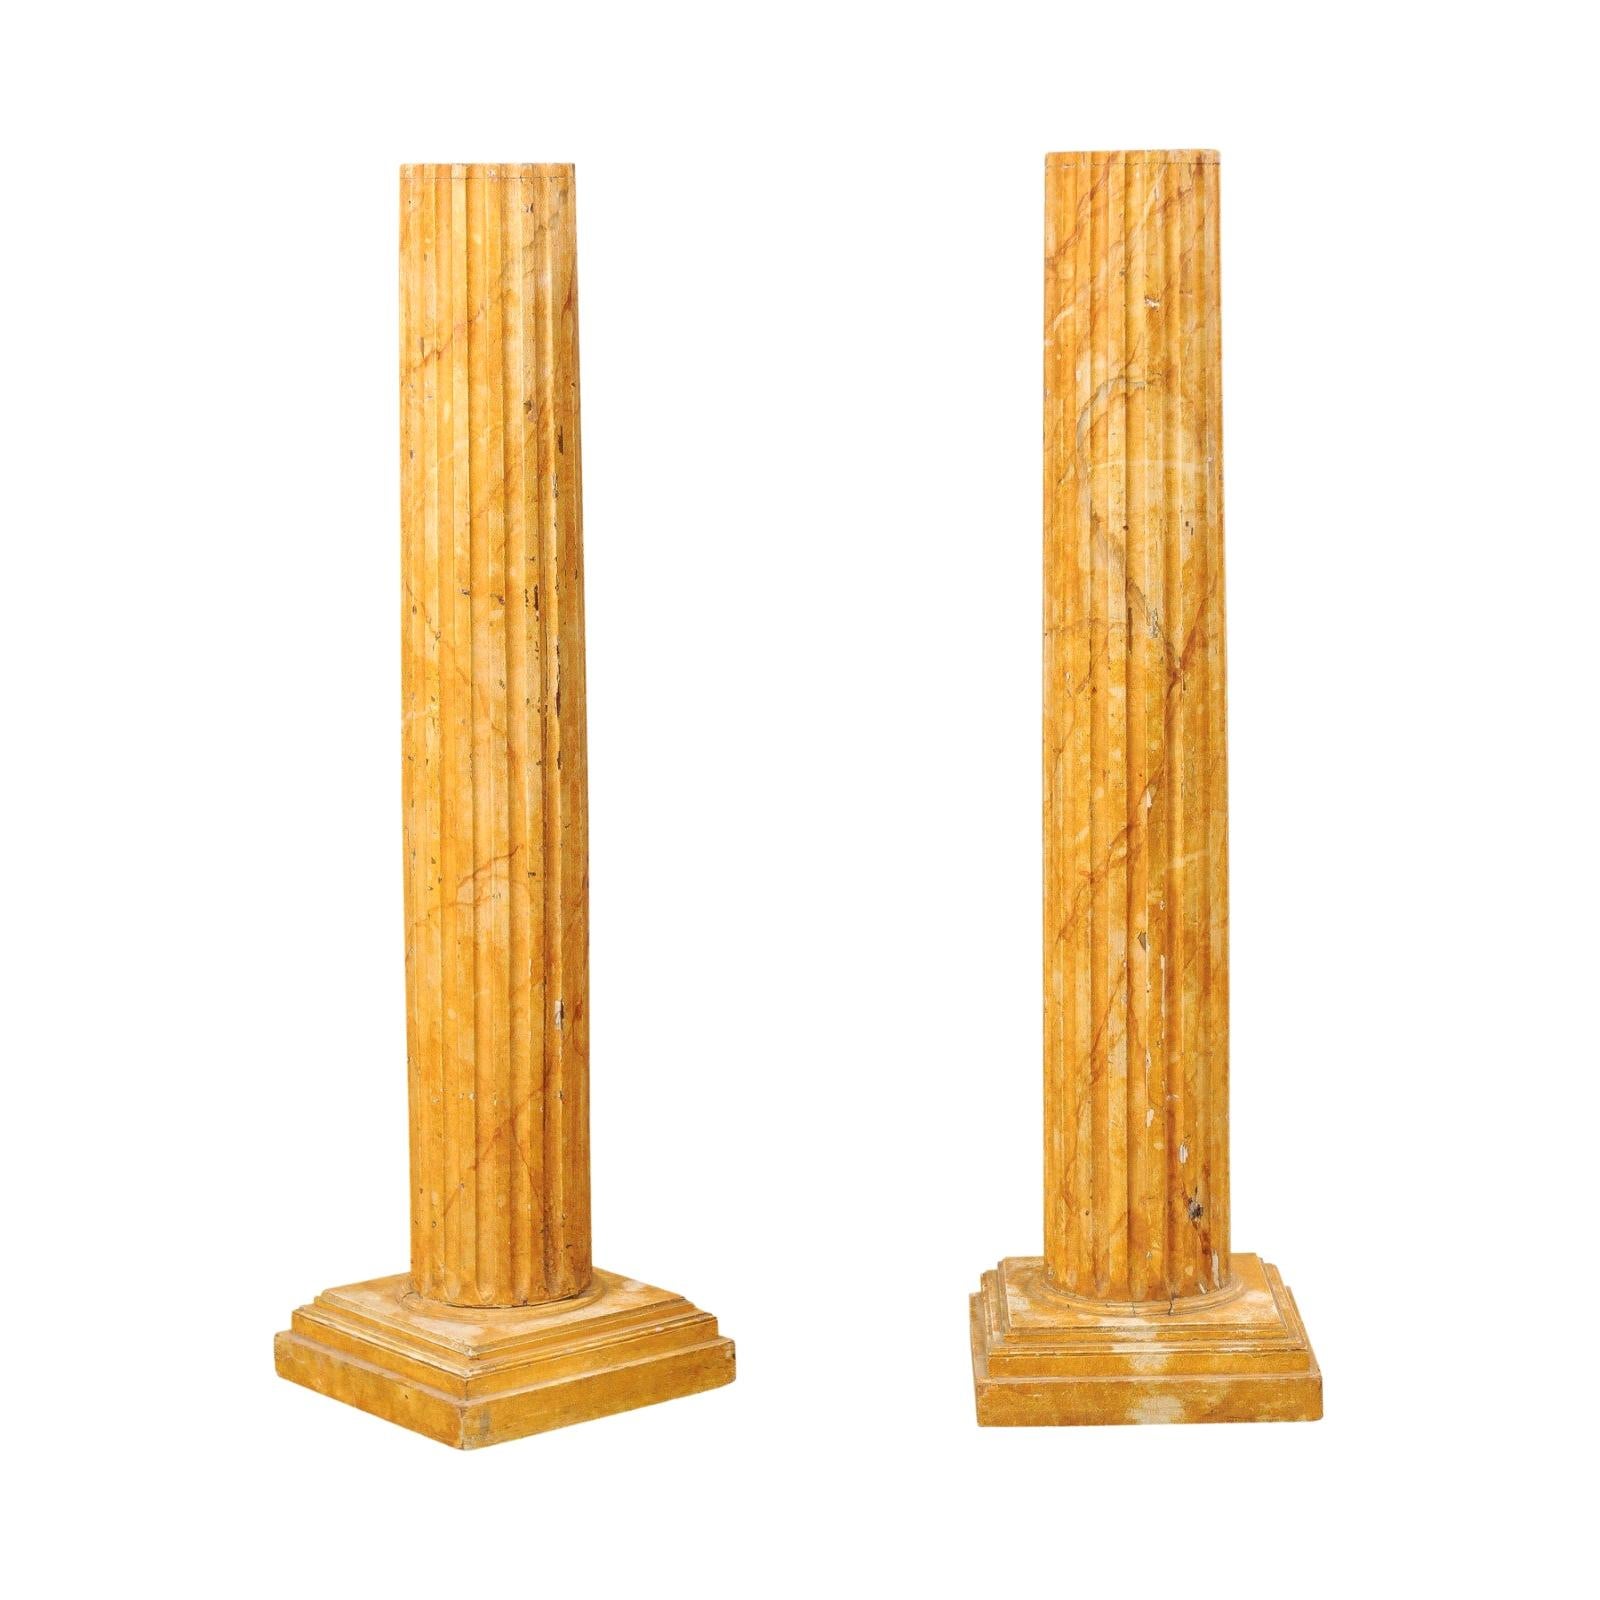 French Pair of Fluted Columns with Faux Marble Finish, Mid-20th Century